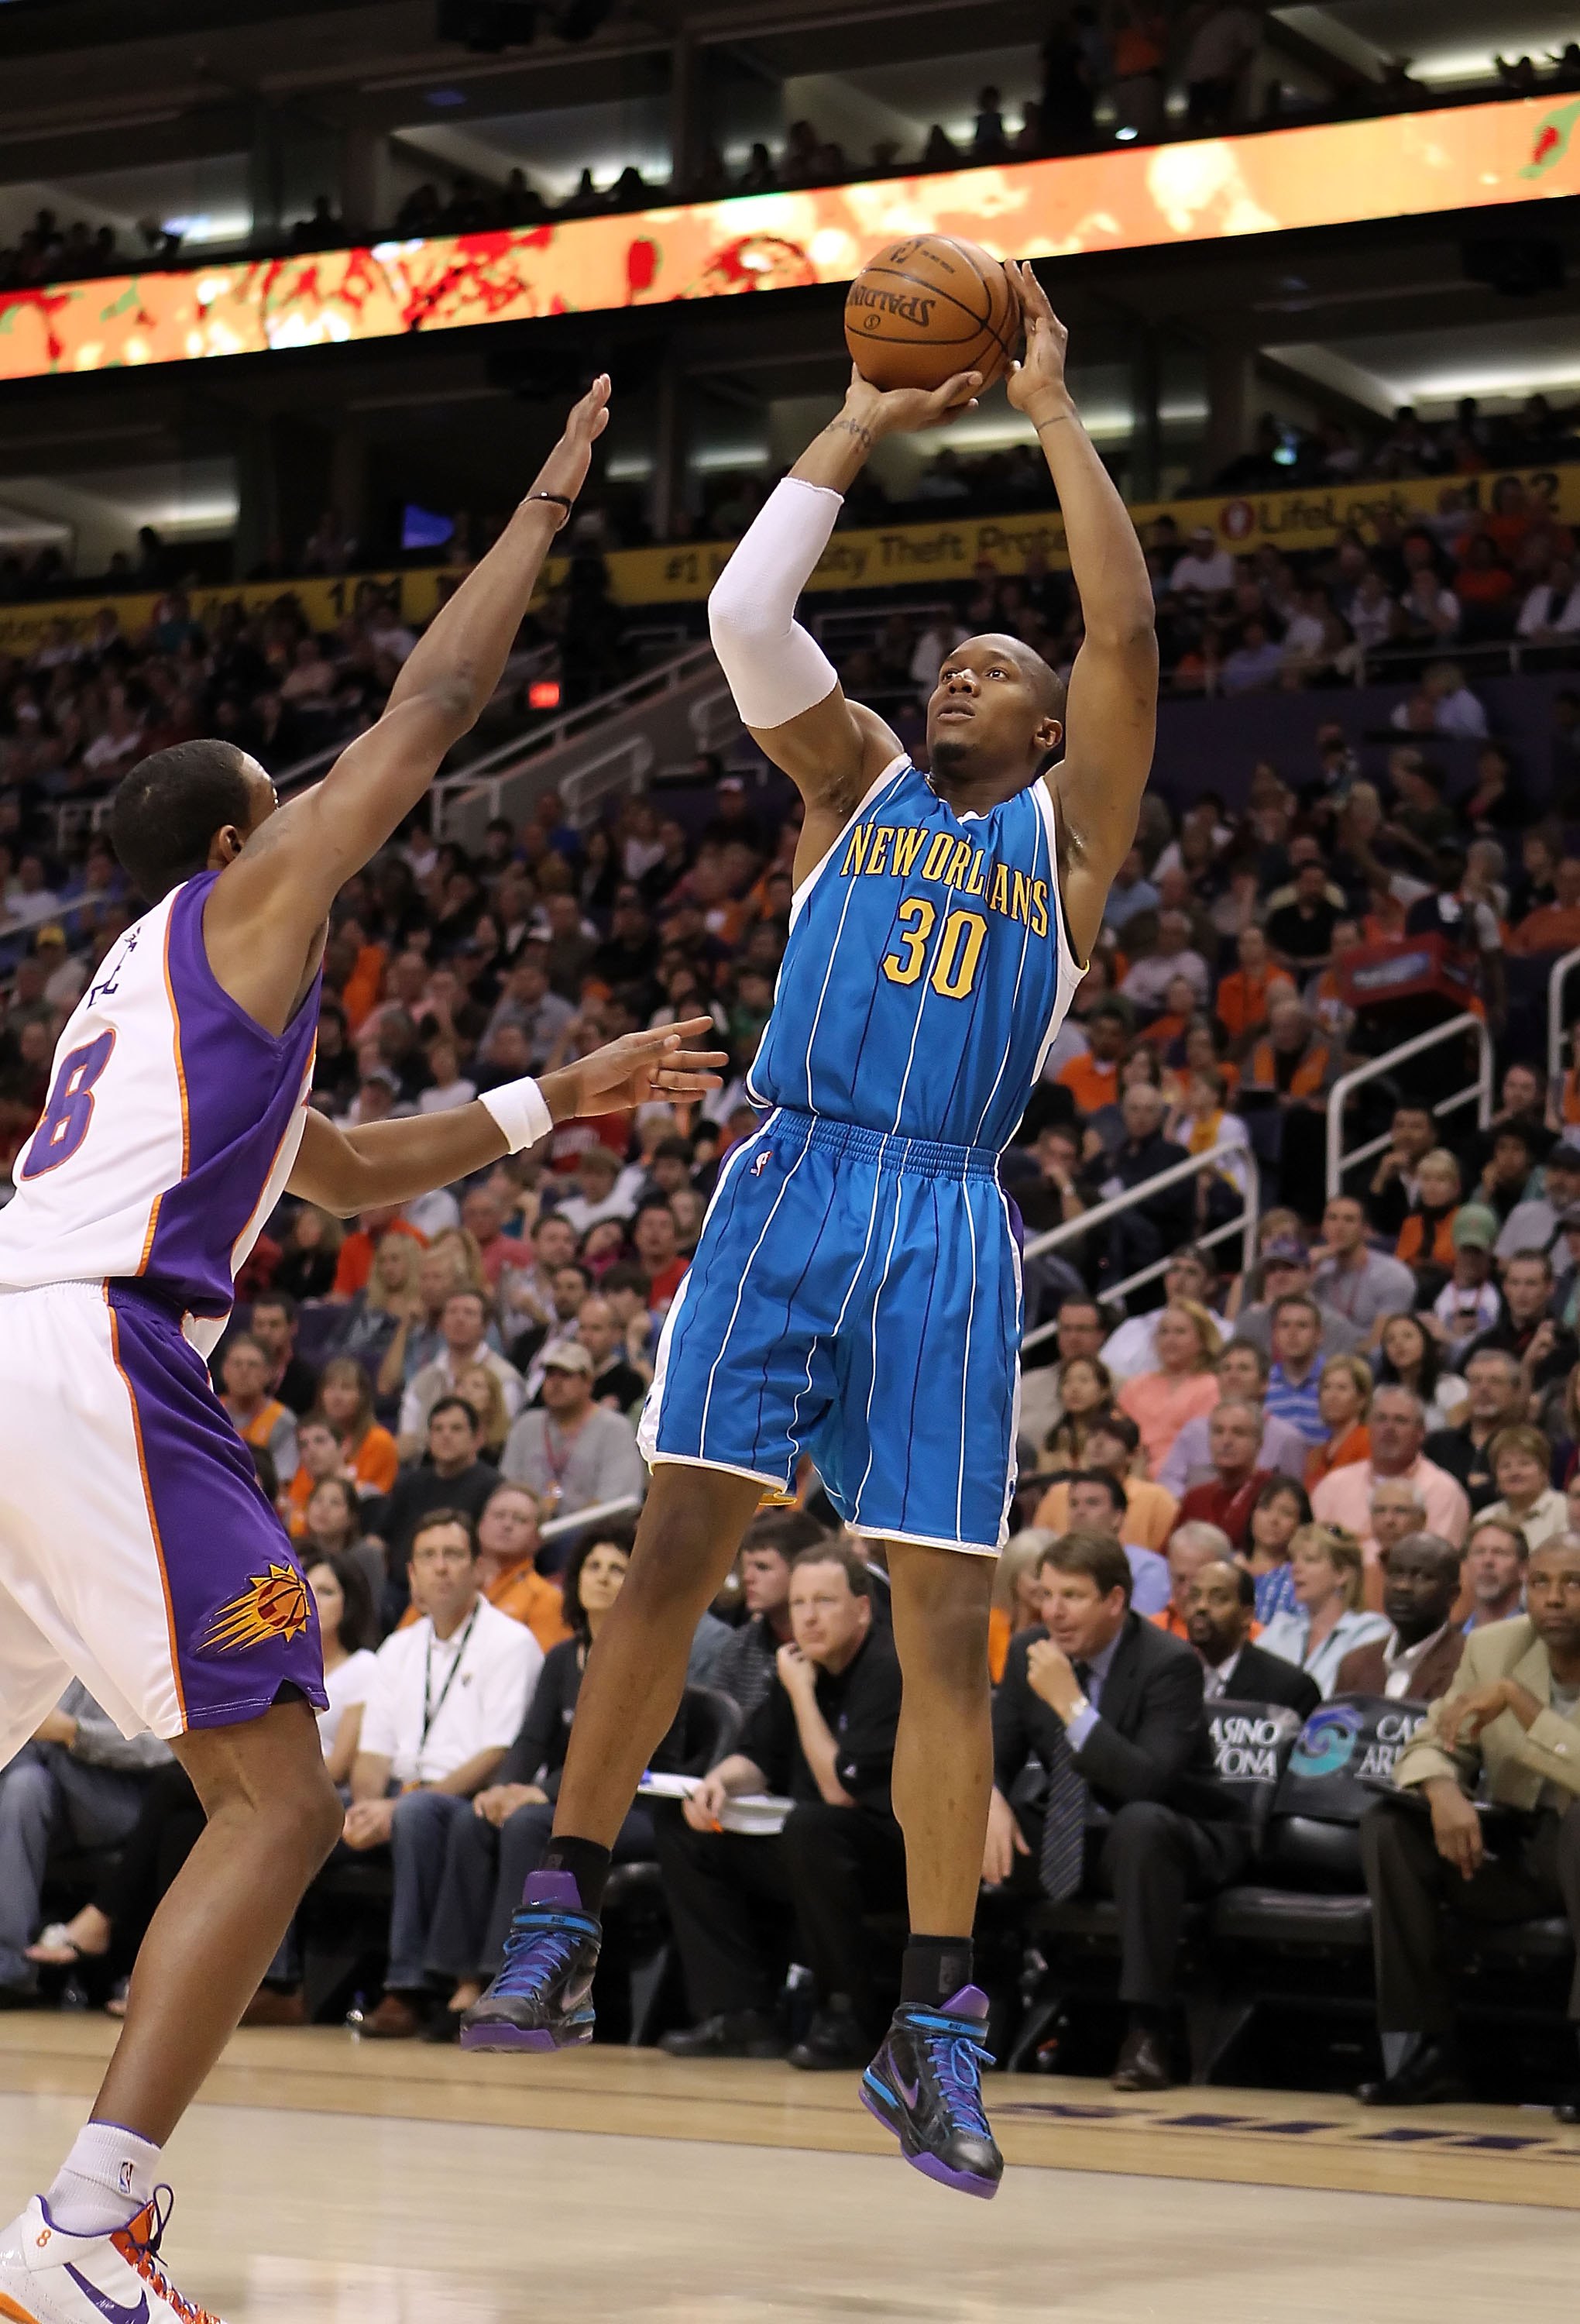 PHOENIX - MARCH 14:  David West #30 of the New Orleans Hornets puts up a shot during the NBA game against the Phoenix Suns at US Airways Center on March 14, 2010 in Phoenix, Arizona.  The Suns defeated the Hornets 120-106.  NOTE TO USER: User expressly ac